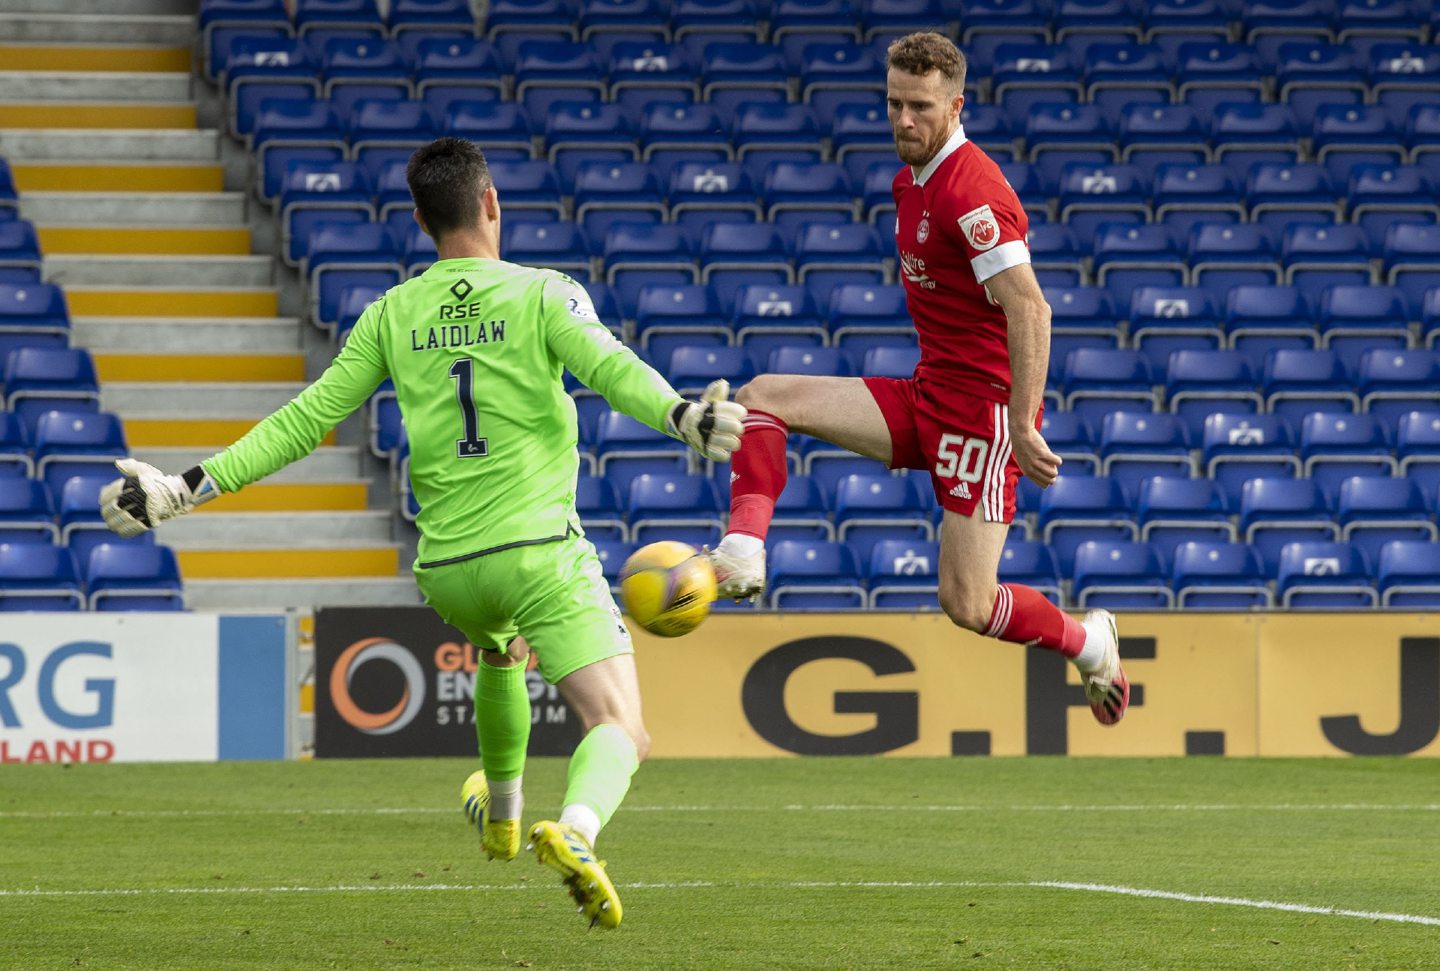 Marley Watkins finds the net for Aberdeen against Ross County.